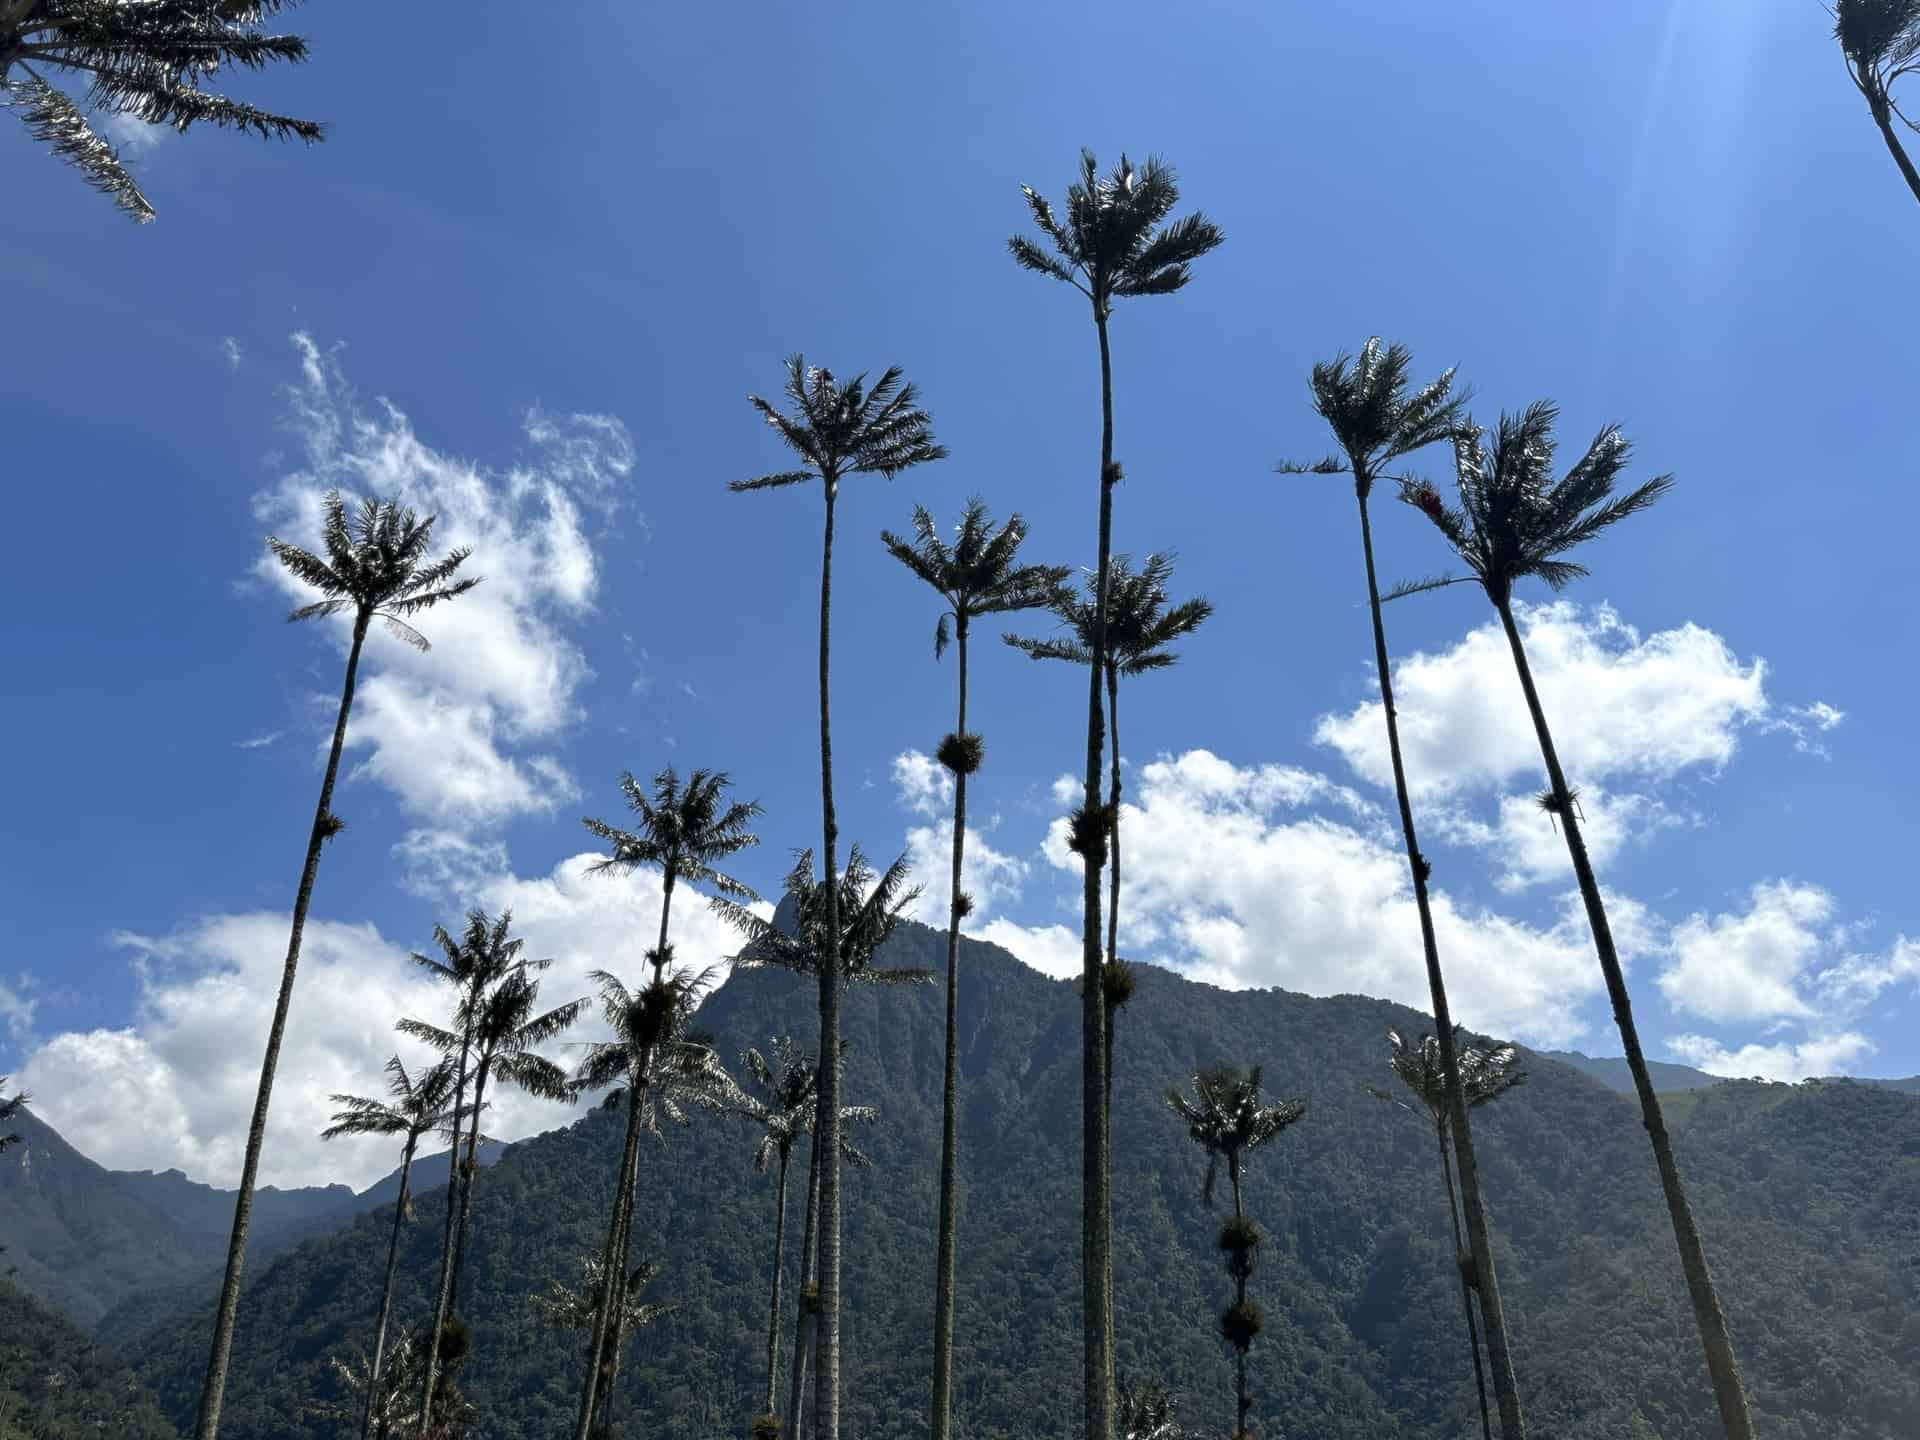 Looking up at the wax palms at Mirador #2 at Cocora Valley in Quindío, Colombia